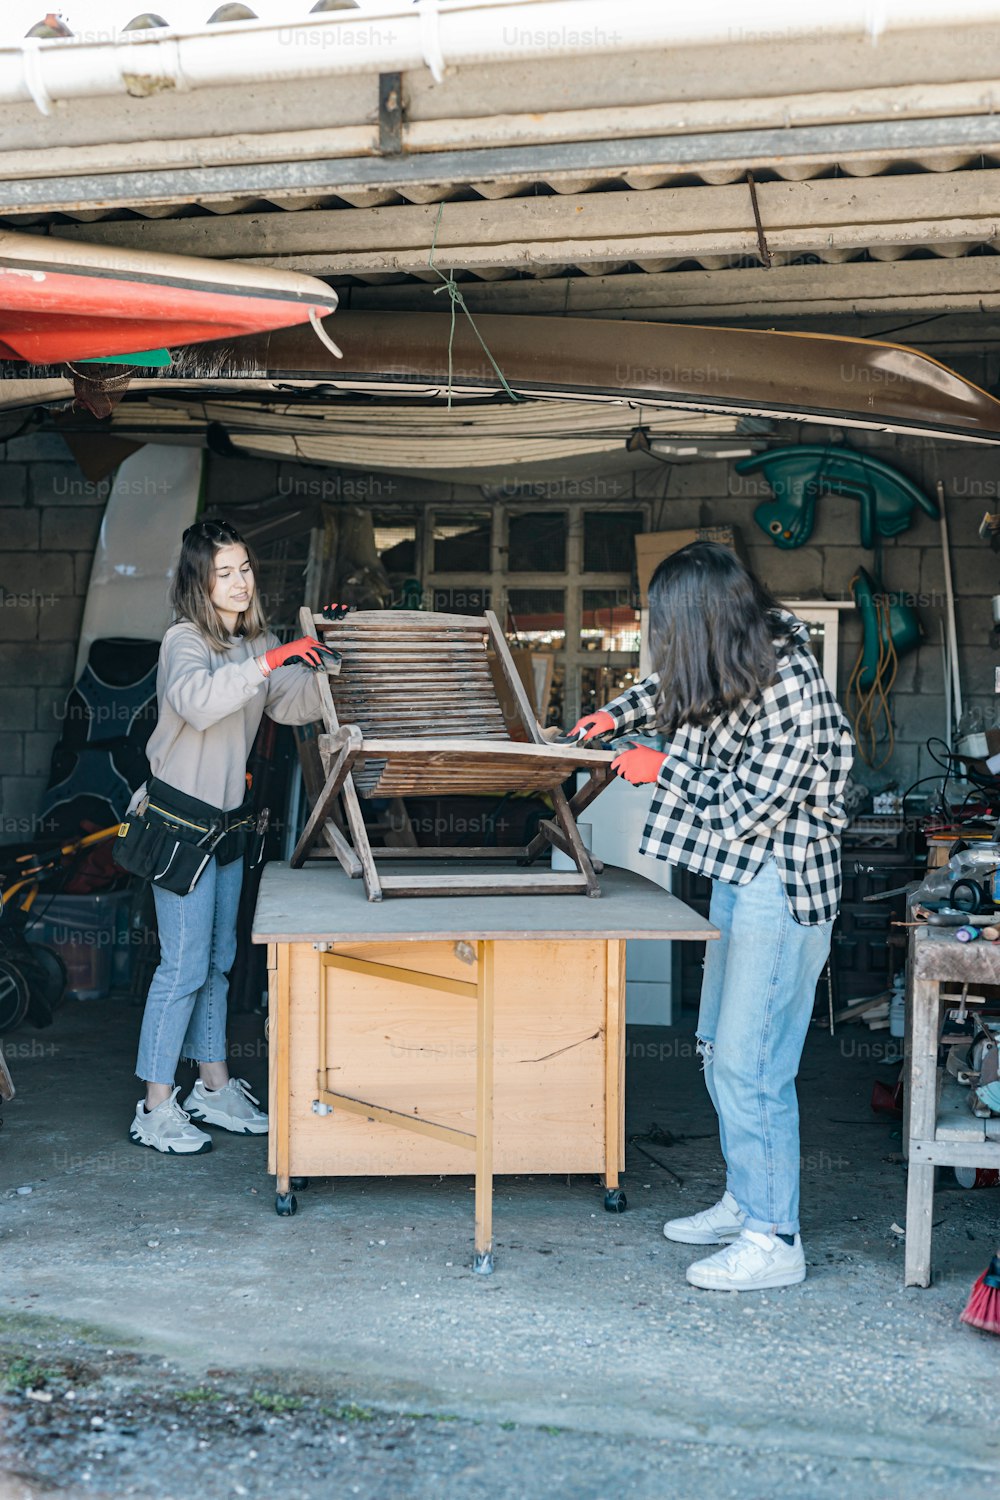 a couple of women working on something in a garage